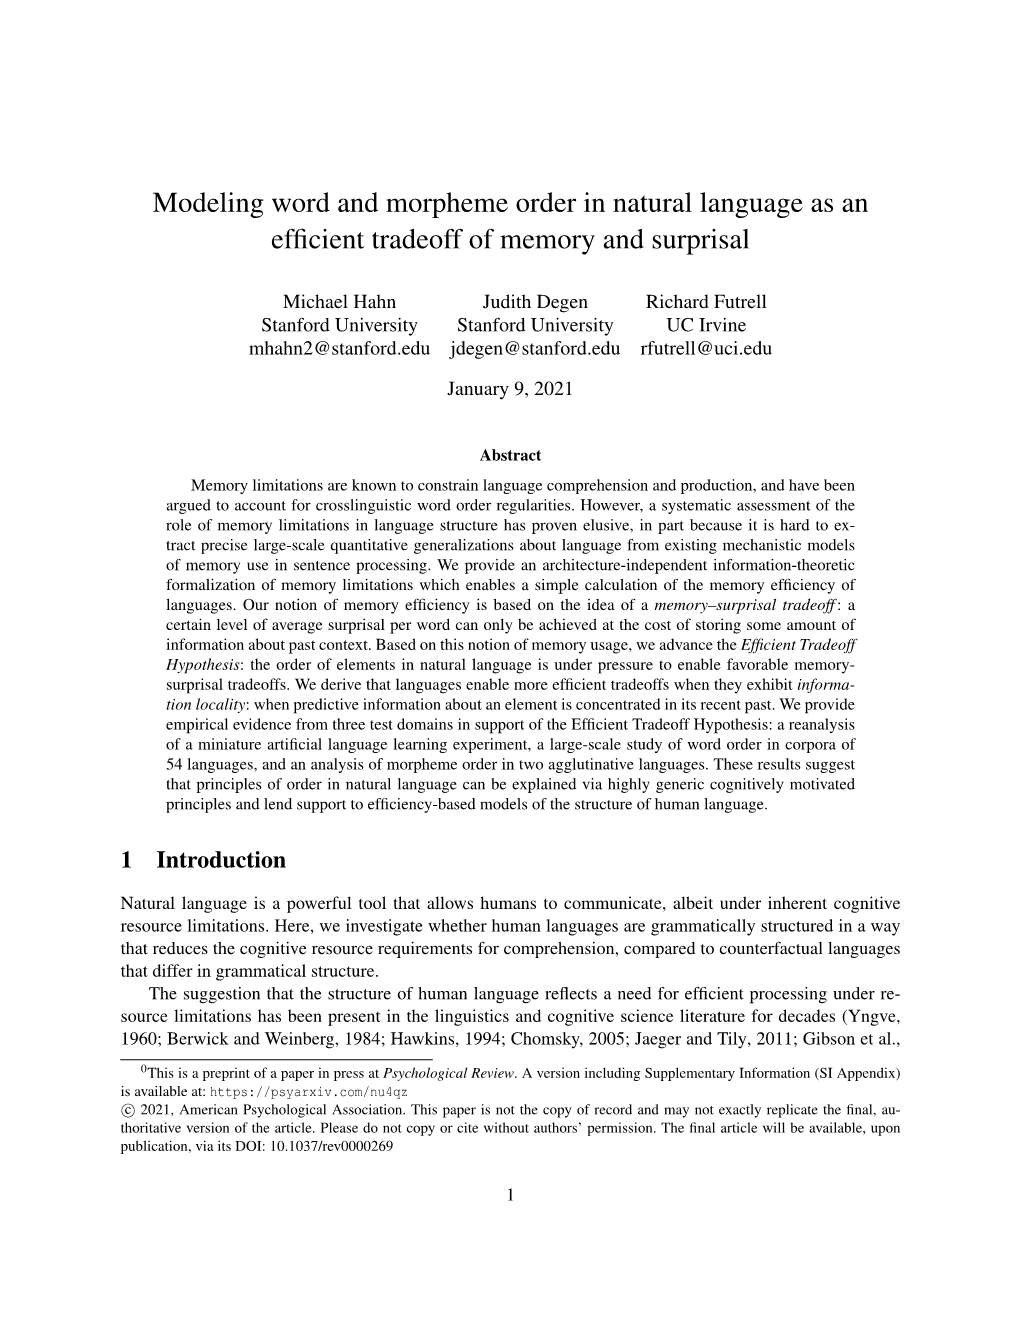 Modeling Word and Morpheme Order in Natural Language As an Efficient Tradeoff of Memory and Surprisal